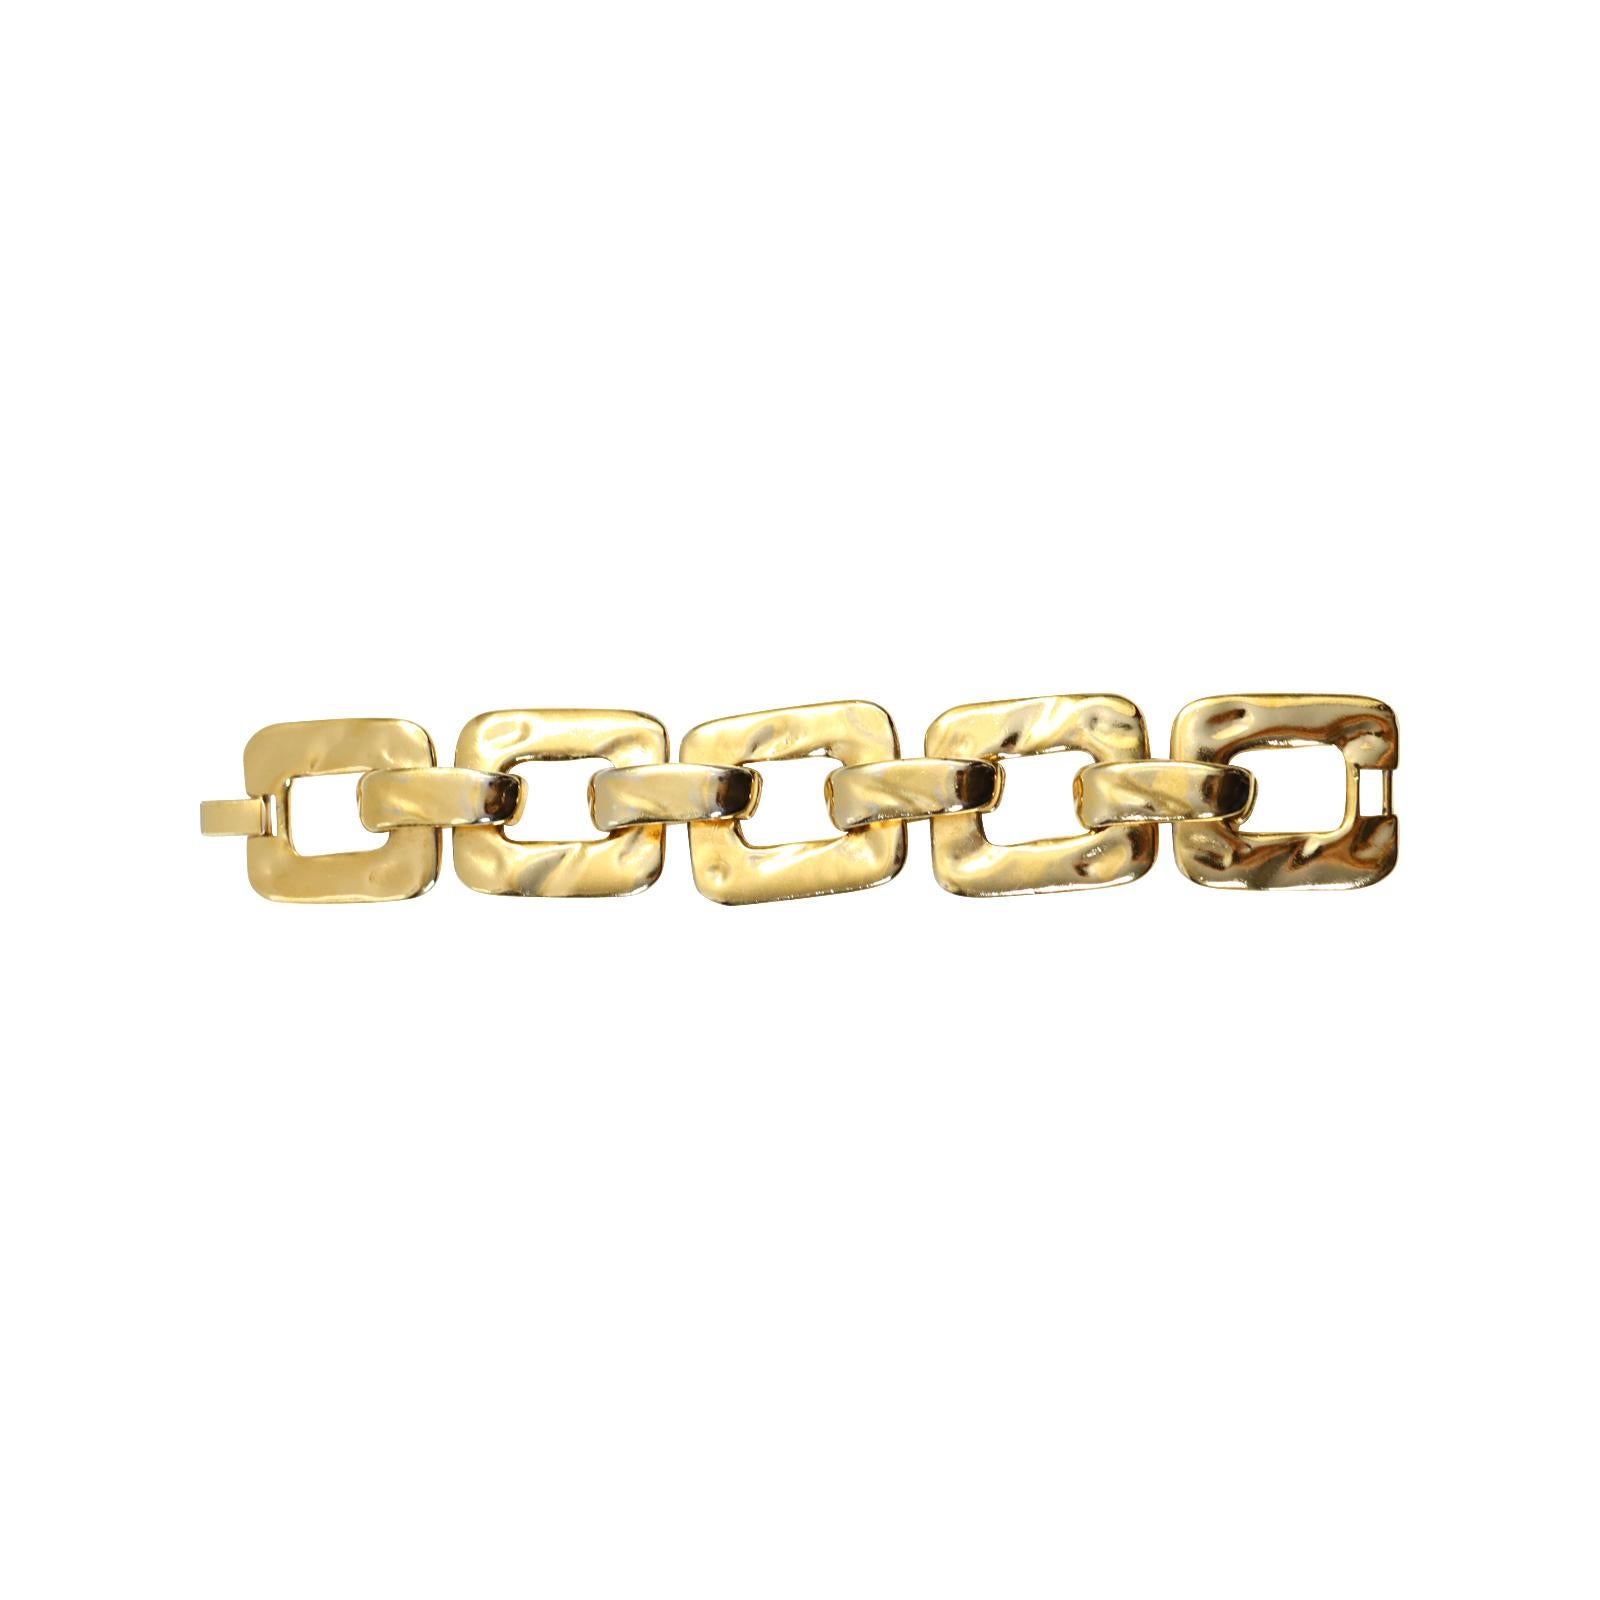 Vintage Yves Saint Laurent YSL Gold Tone Heavy Link Bracelet Circa 1970s.  Signed and Numbered #267 of #425. Special when on.  I have this set myself.  I have managed over the years to acquire the bracelet and the earrings and the necklace all in